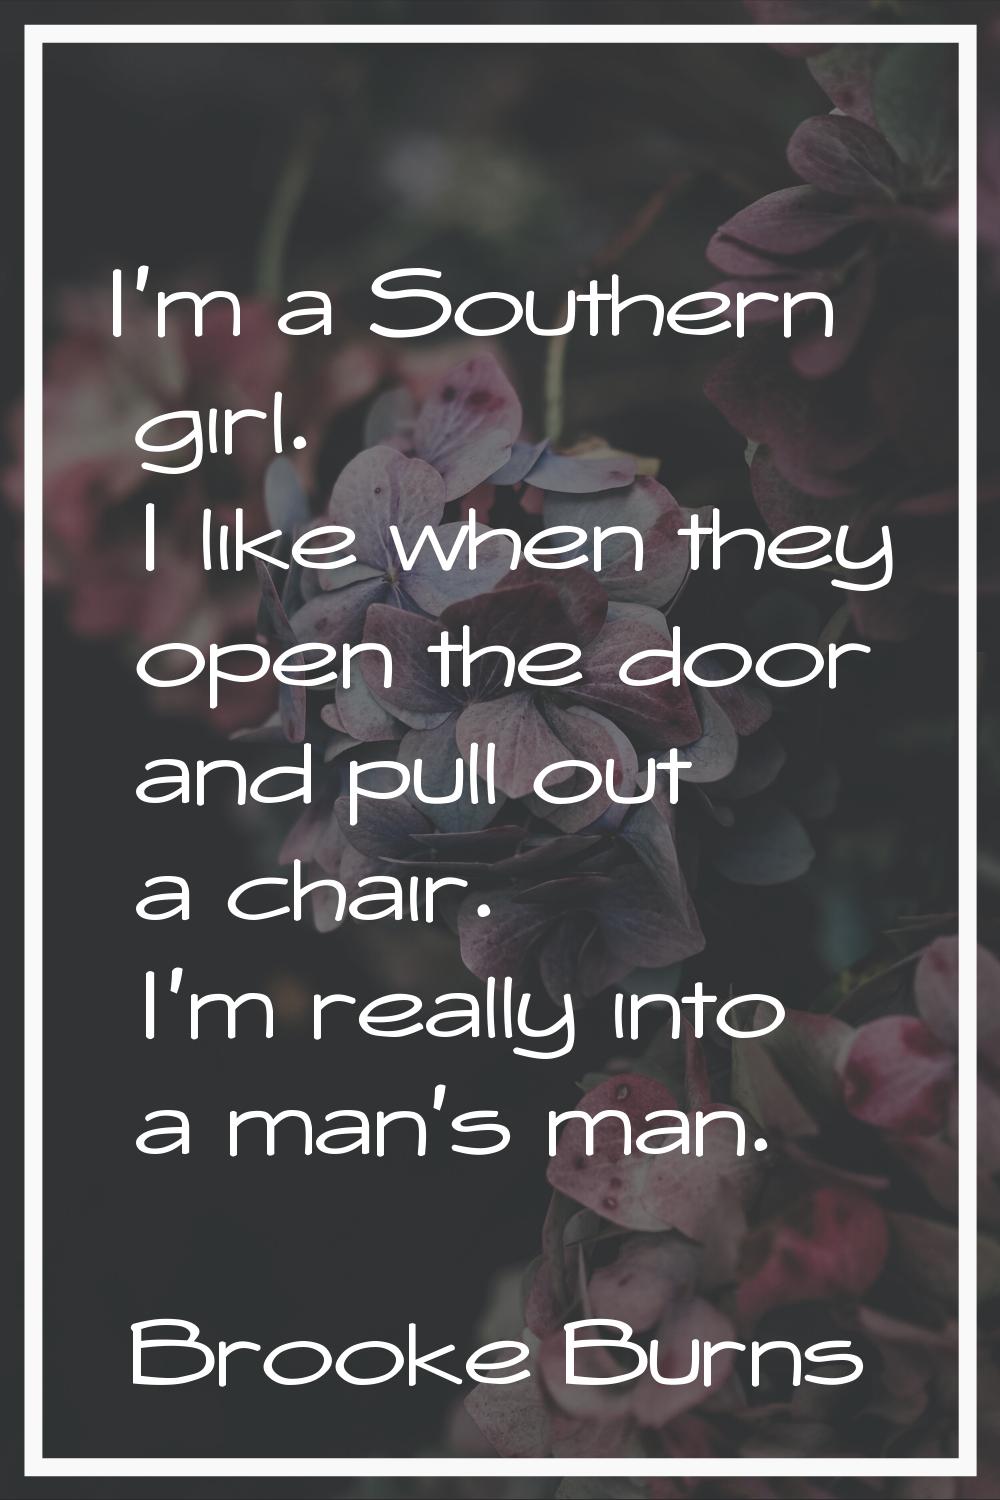 I'm a Southern girl. I like when they open the door and pull out a chair. I'm really into a man's m